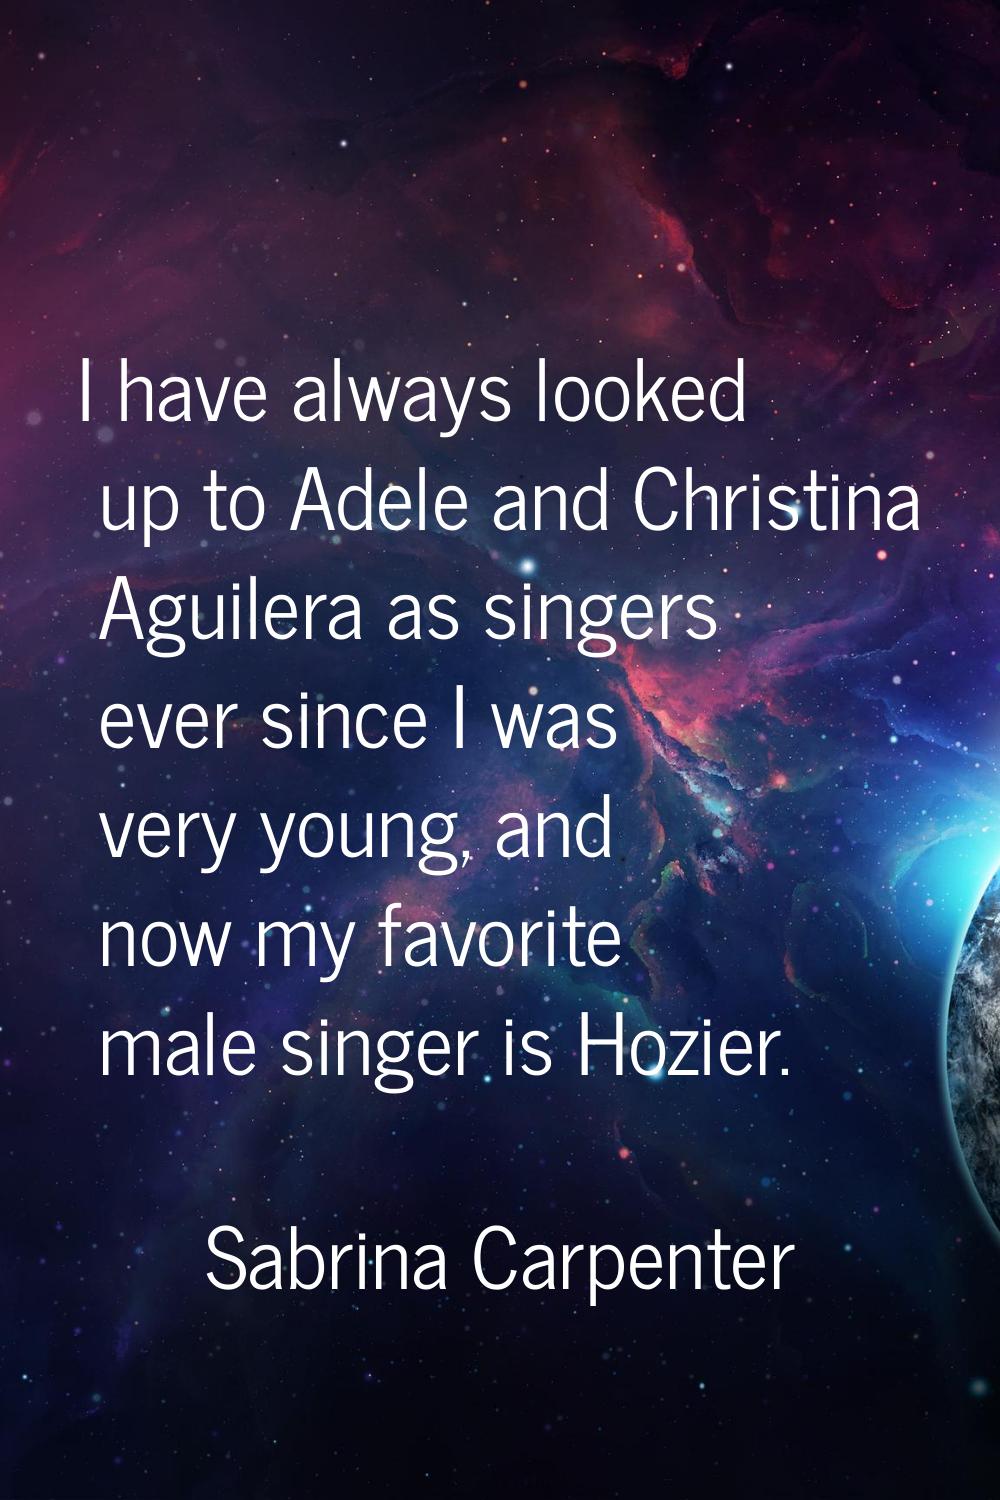 I have always looked up to Adele and Christina Aguilera as singers ever since I was very young, and